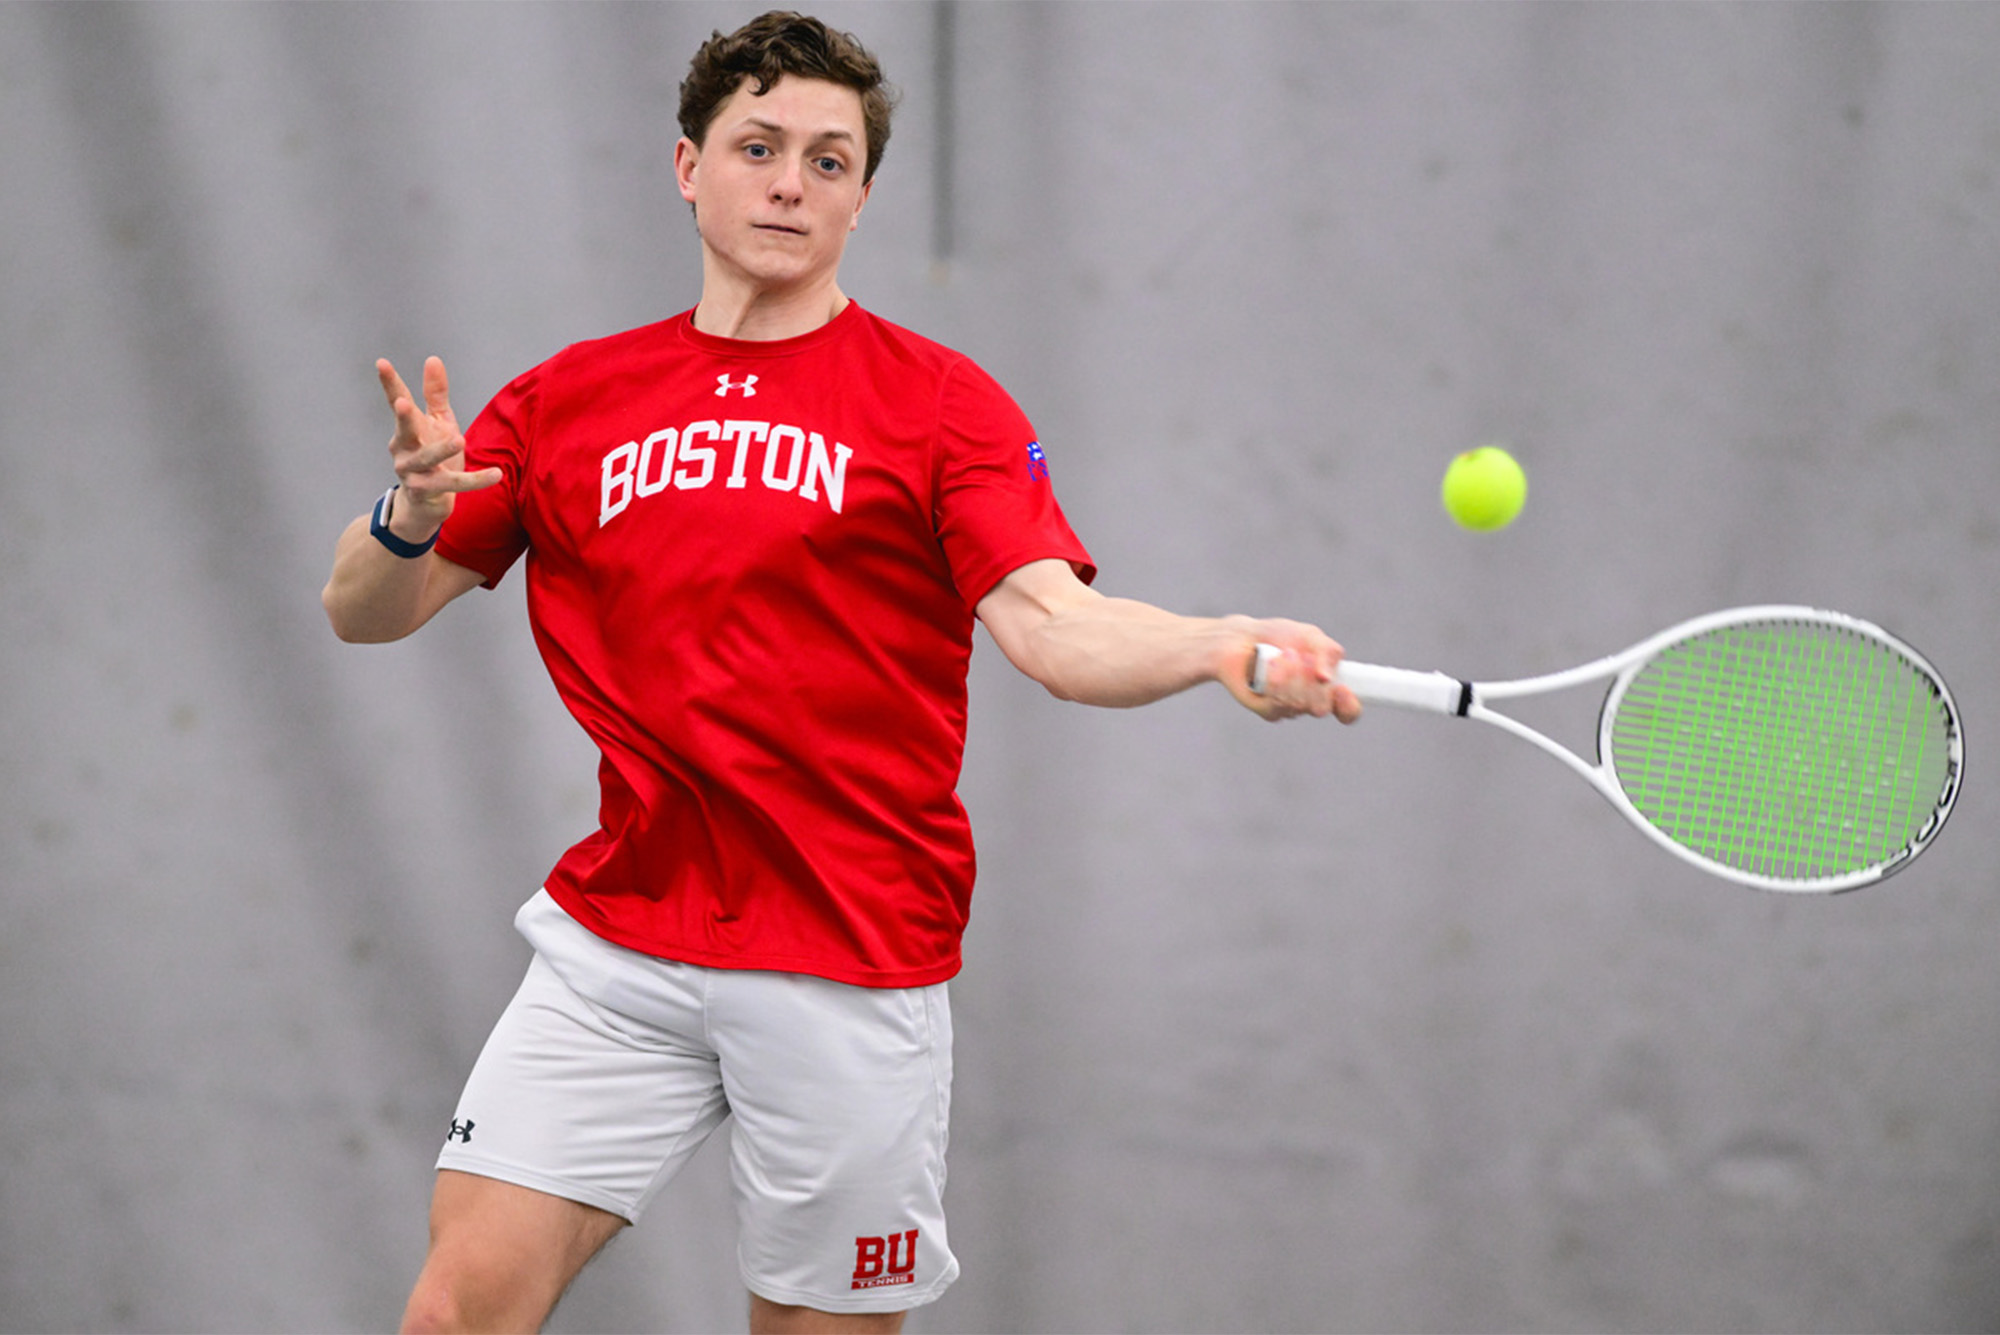 Photo: A college tennis player wearing a red Boston University shirt and white shorts hits a tennis ball at a recent match